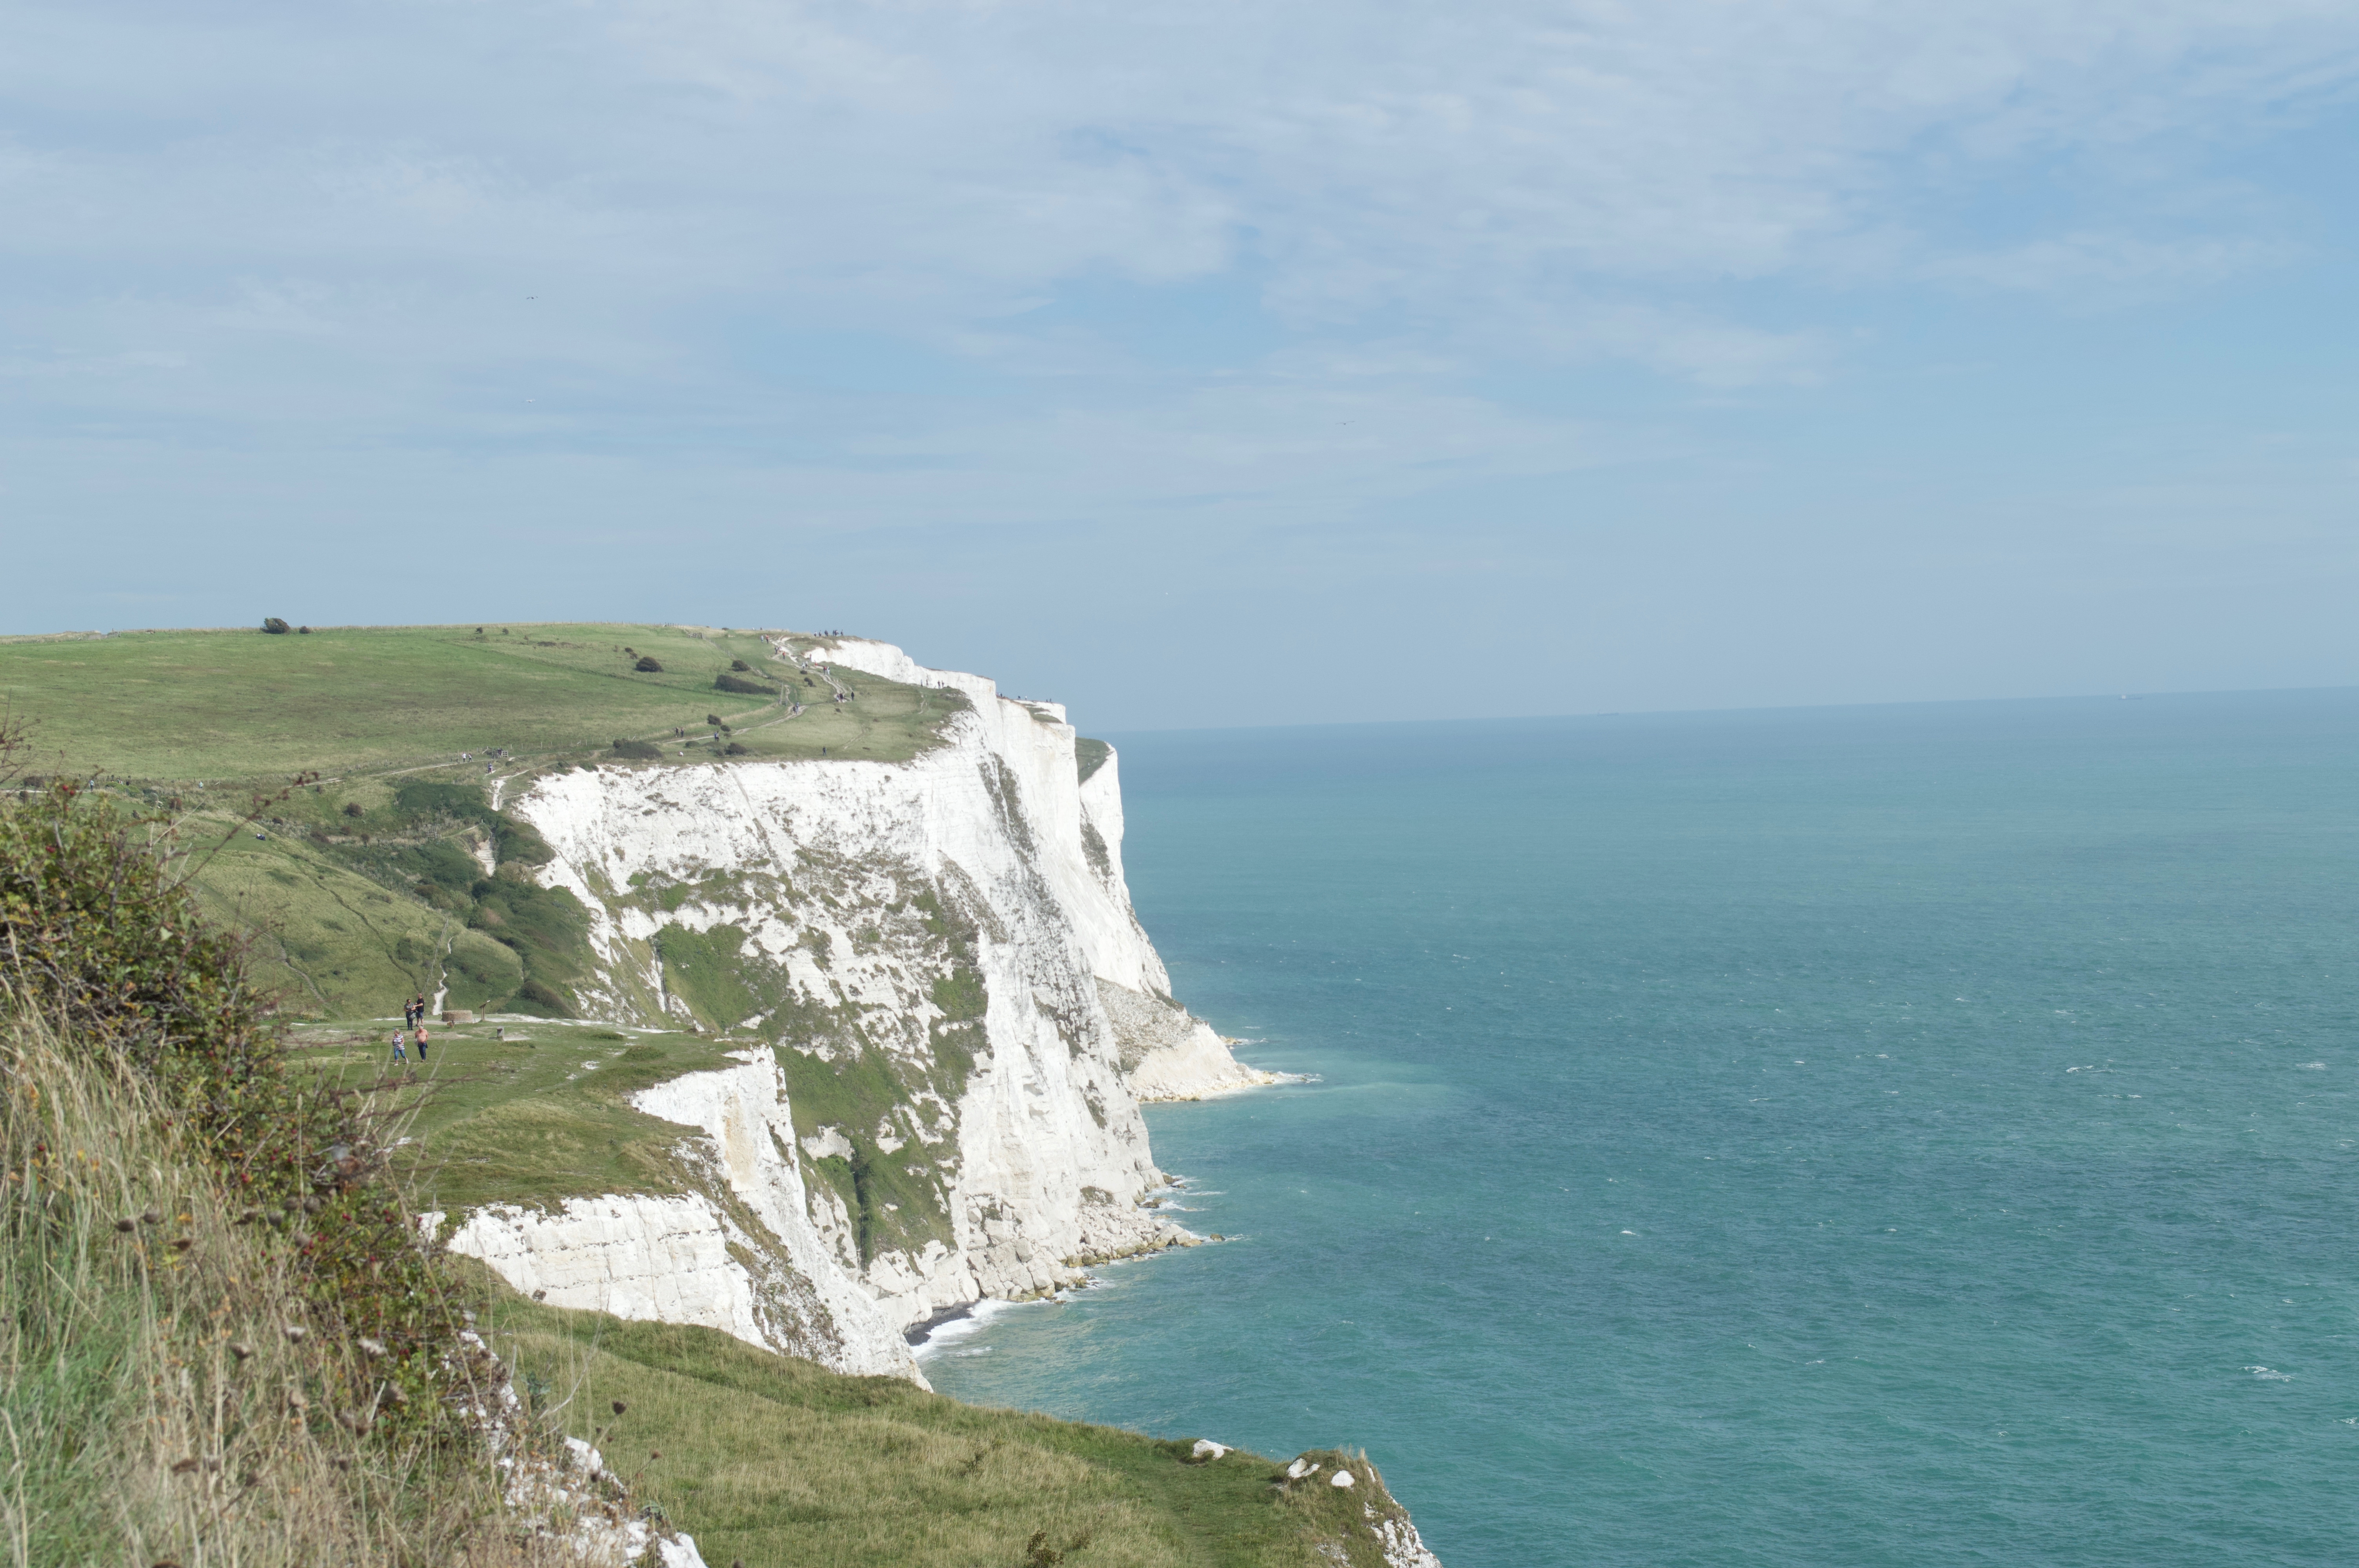 White Cliffs of Dover 52 Ancestors in 52 Weeks Thankful